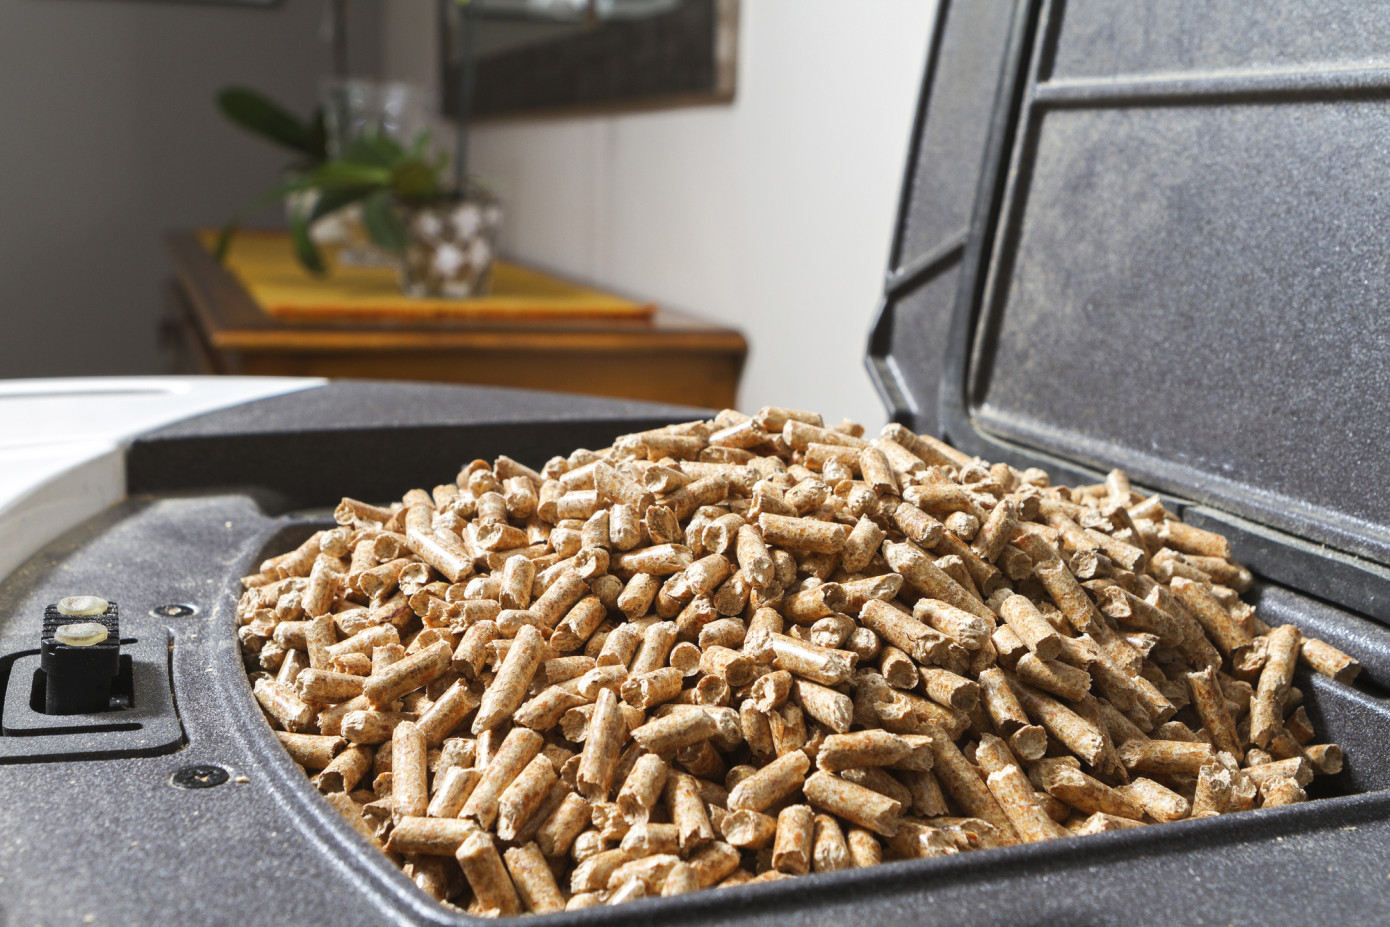 In January, price for wood pellets imported to Netherlands surges 95%